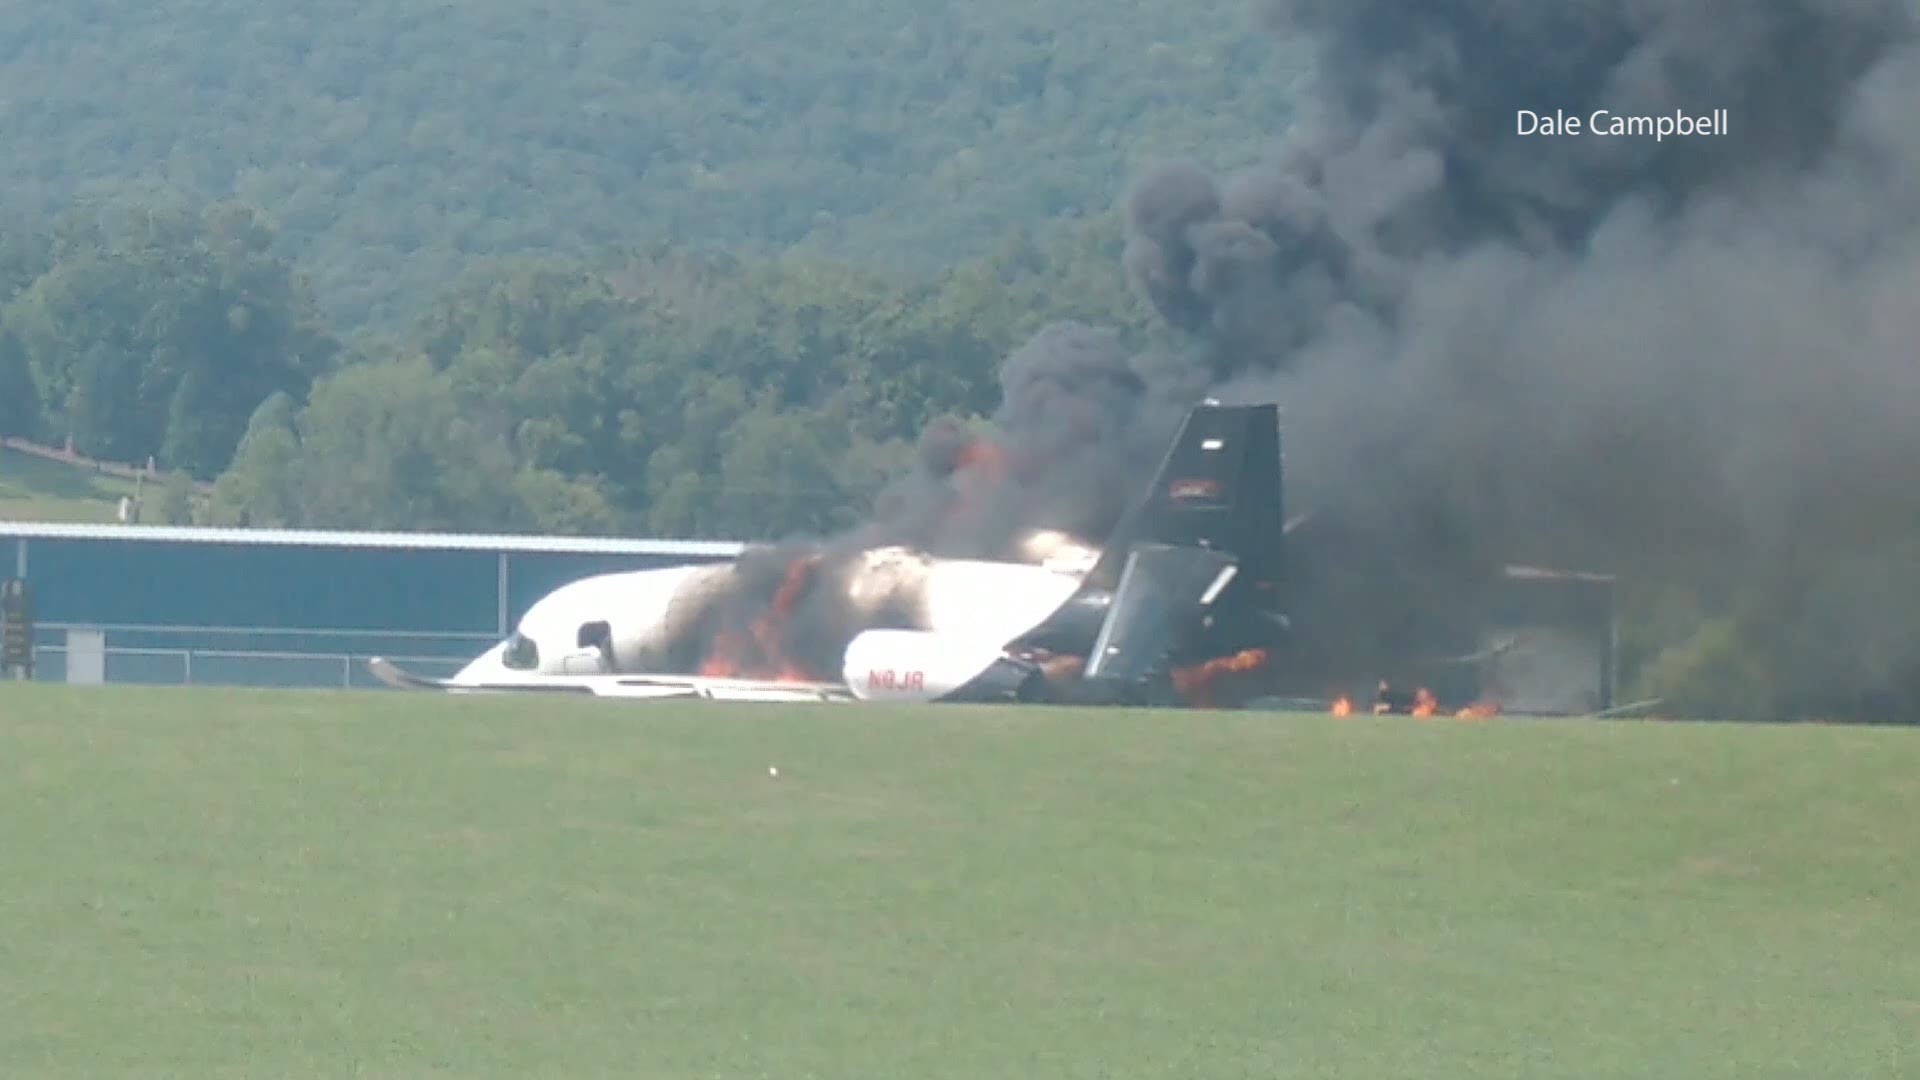 Private jet belonging to NASCAR champion Dale Earnhardt Jr. catches fire after crashing in Elizabeth Municipal Airport in Carter County, Tennessee. Earnhardt, his wife, and one year old child, along with two pilots, were transported to an area hospital.
MORE: https://on.wcnc.com/2OTZ4zU